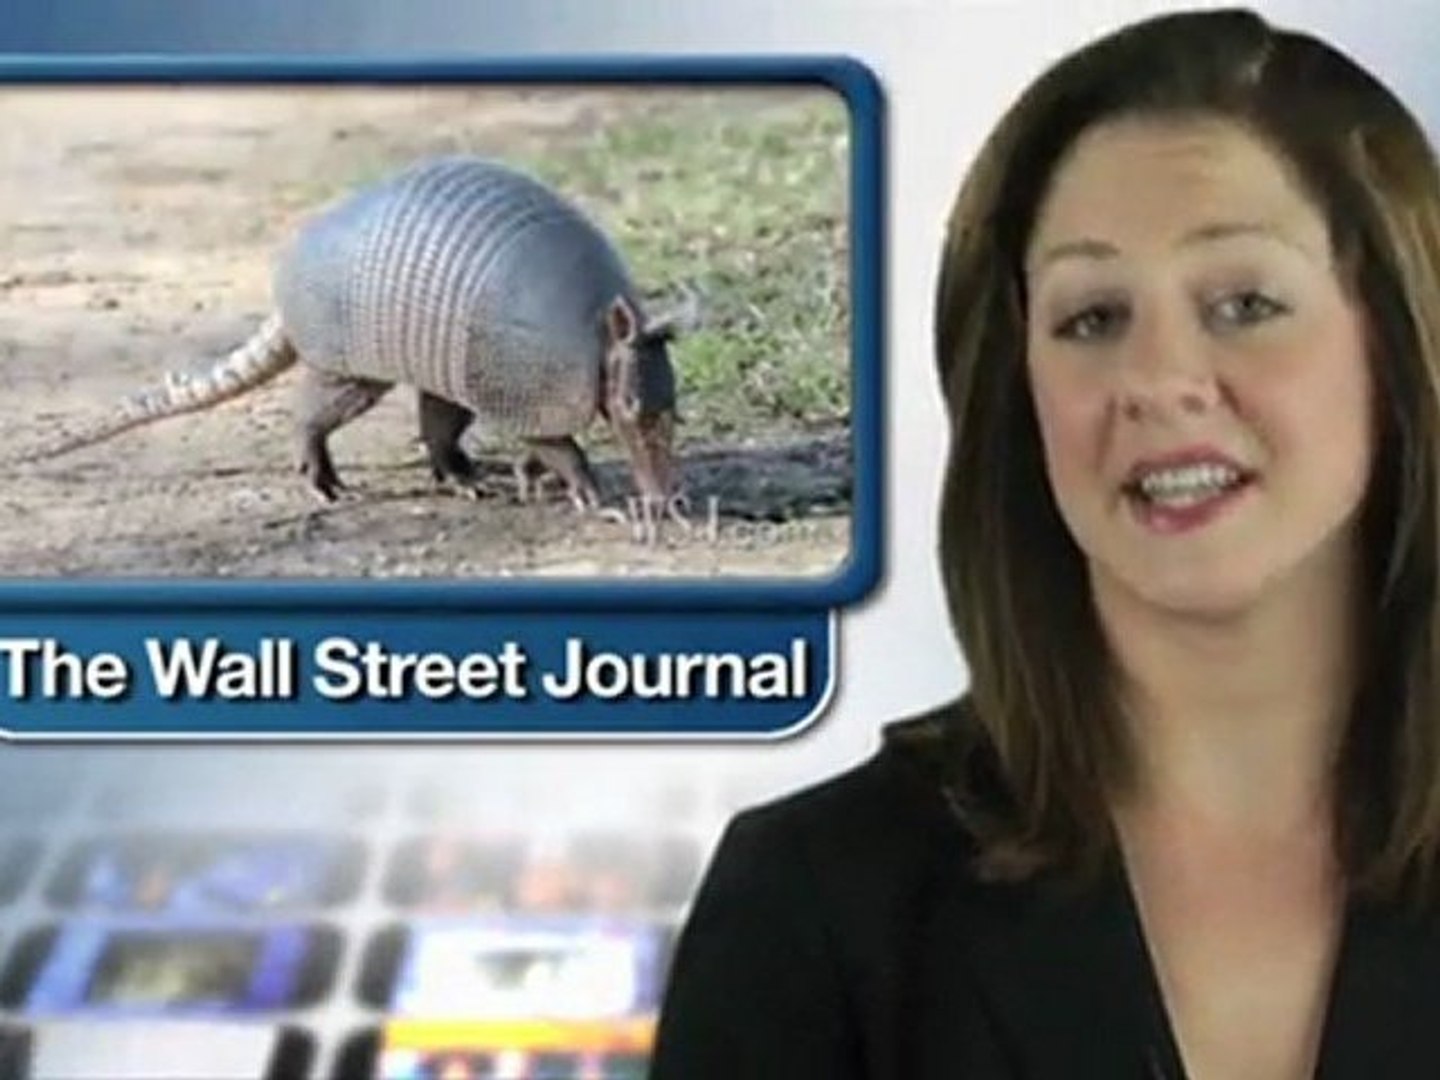 A Link to Leprosy Through Armadillos?